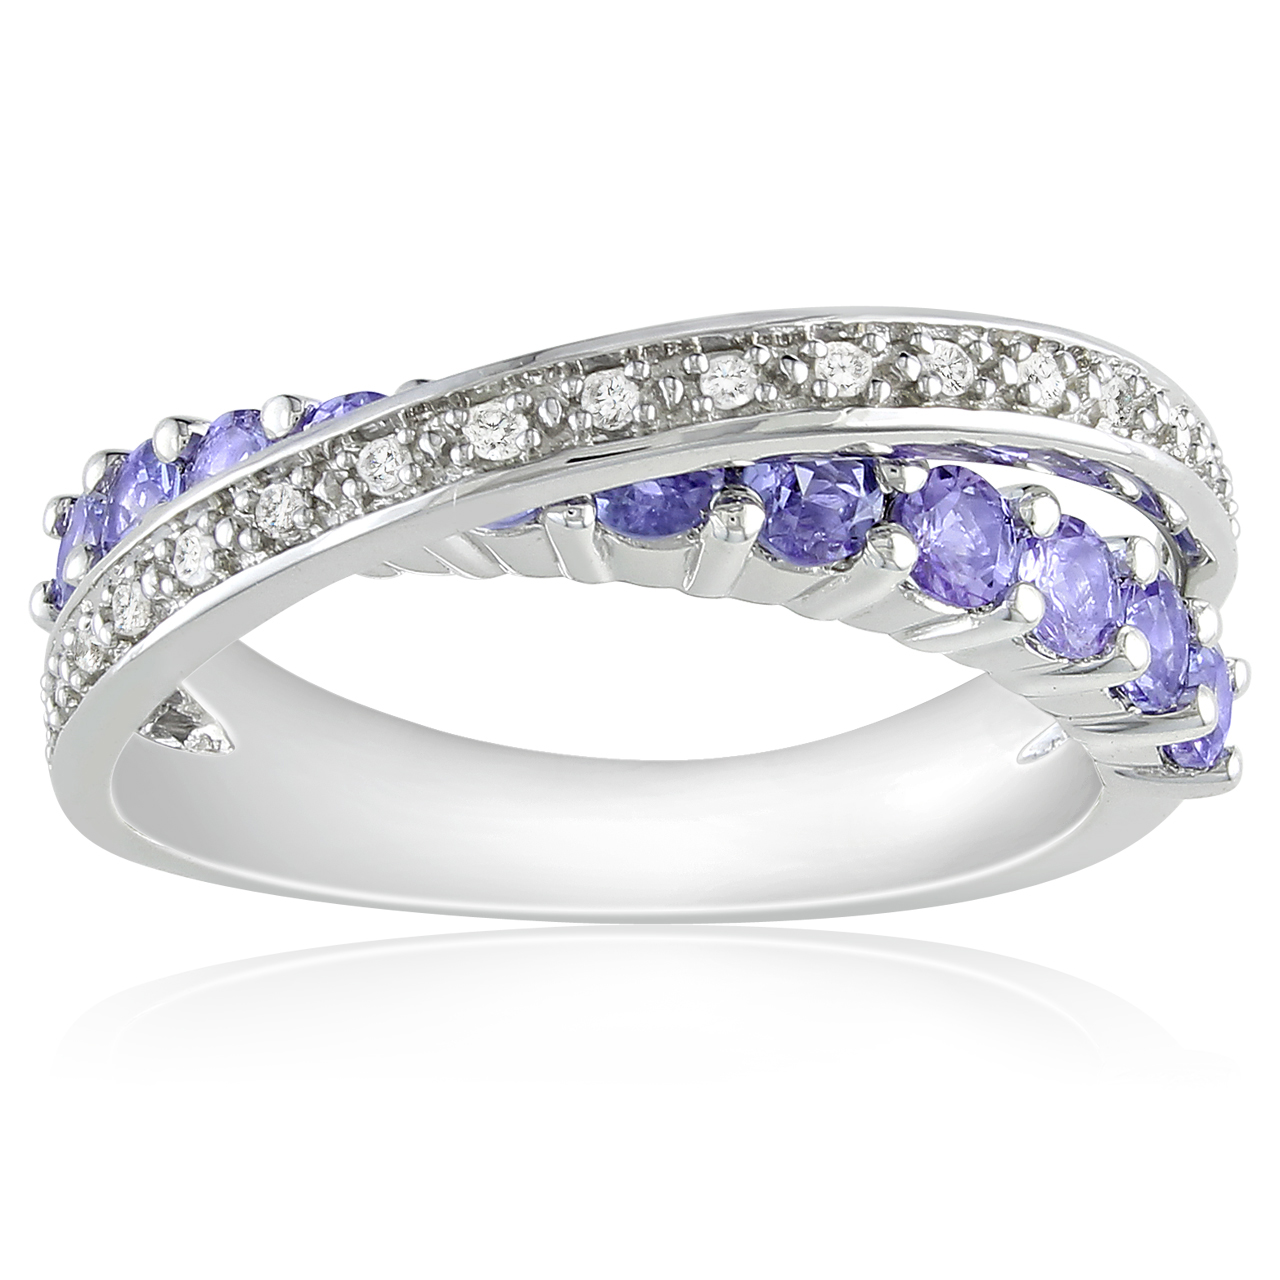 Amour 1/10 Carat T.W. Diamond and 3/4 Carat T.G.W. Tanzanite Fashion Ring in Sterling Silver GH I3